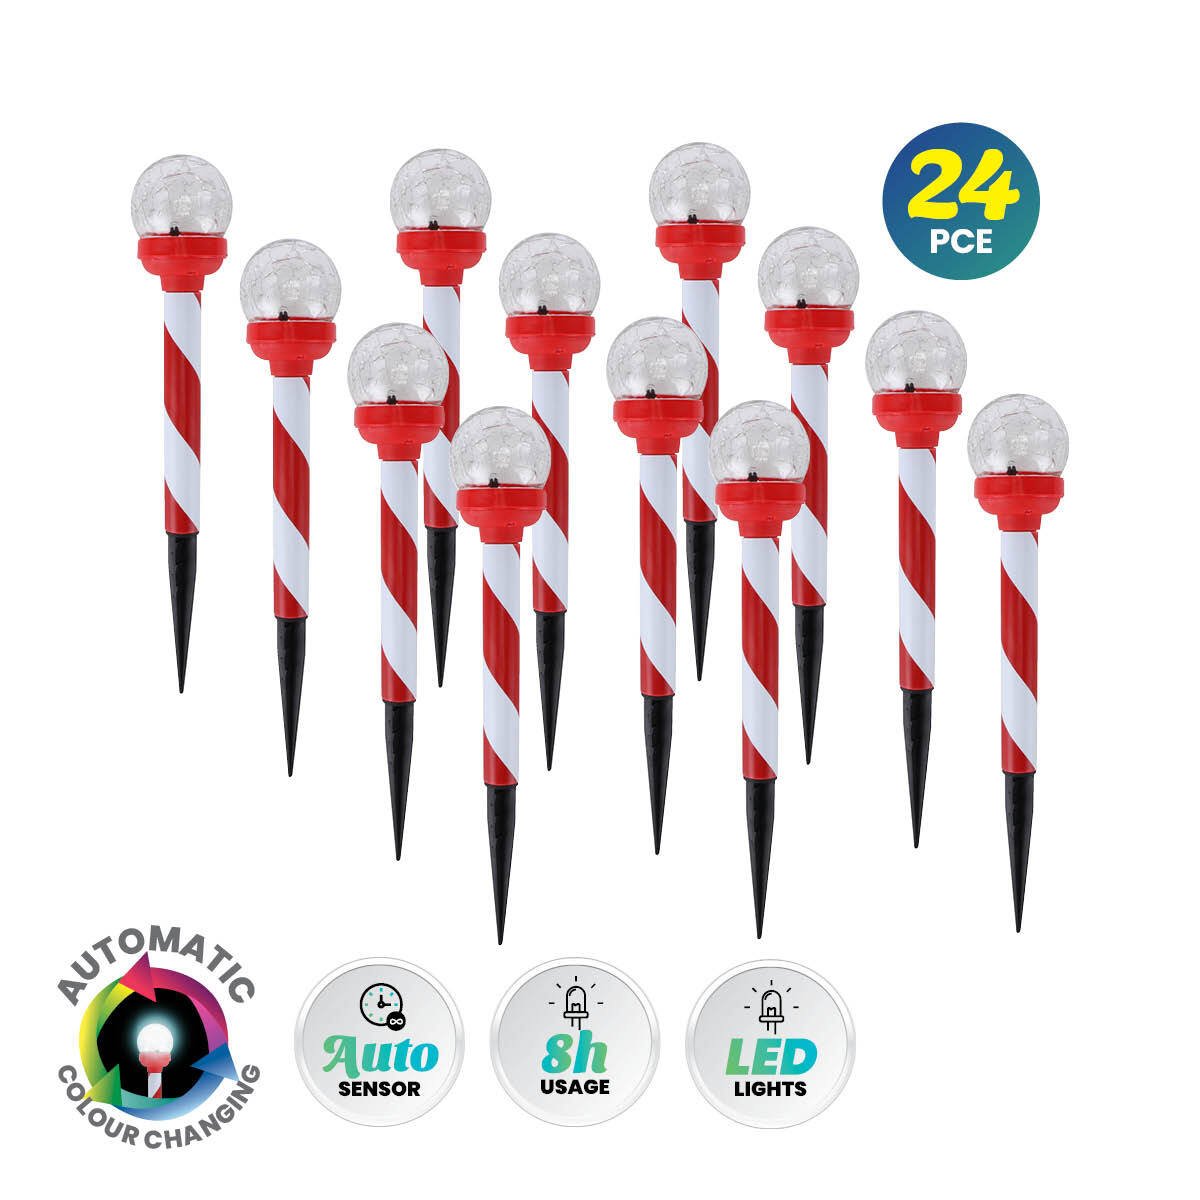 Christmas By Sas 24PCE Solar Candy Cane Stakes With Crackle Balls LED 35cm - Little Kids Business